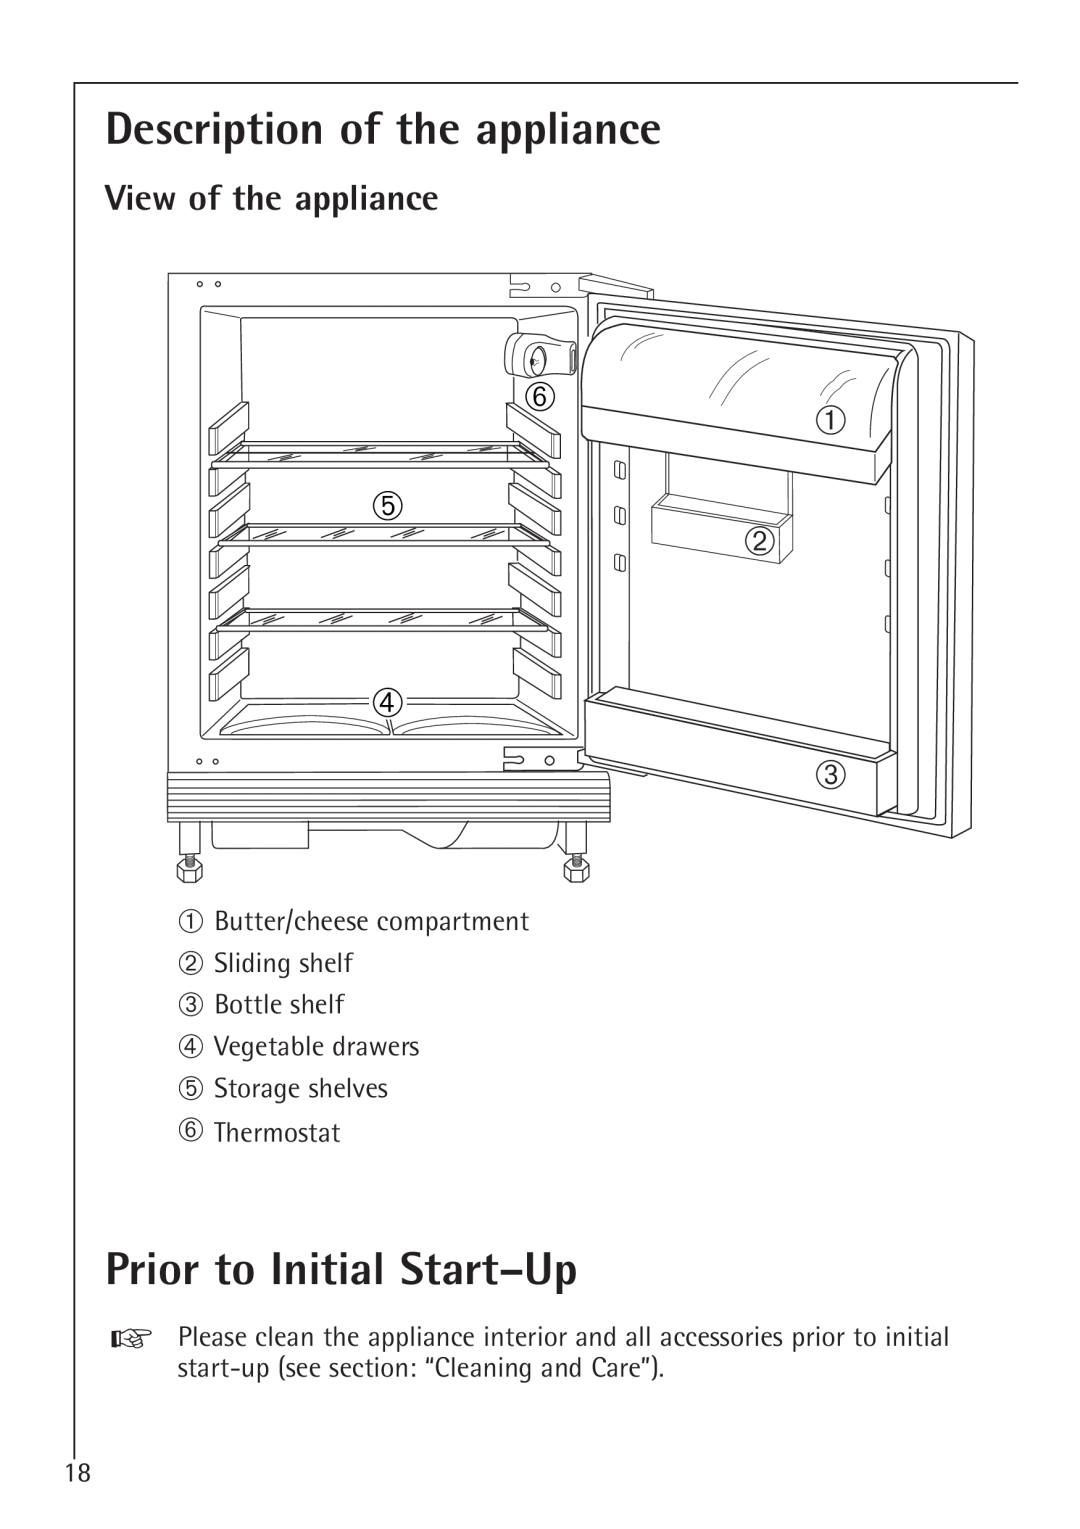 Electrolux 86000 i installation instructions Description of the appliance, Prior to Initial Start-Up, View of the appliance 